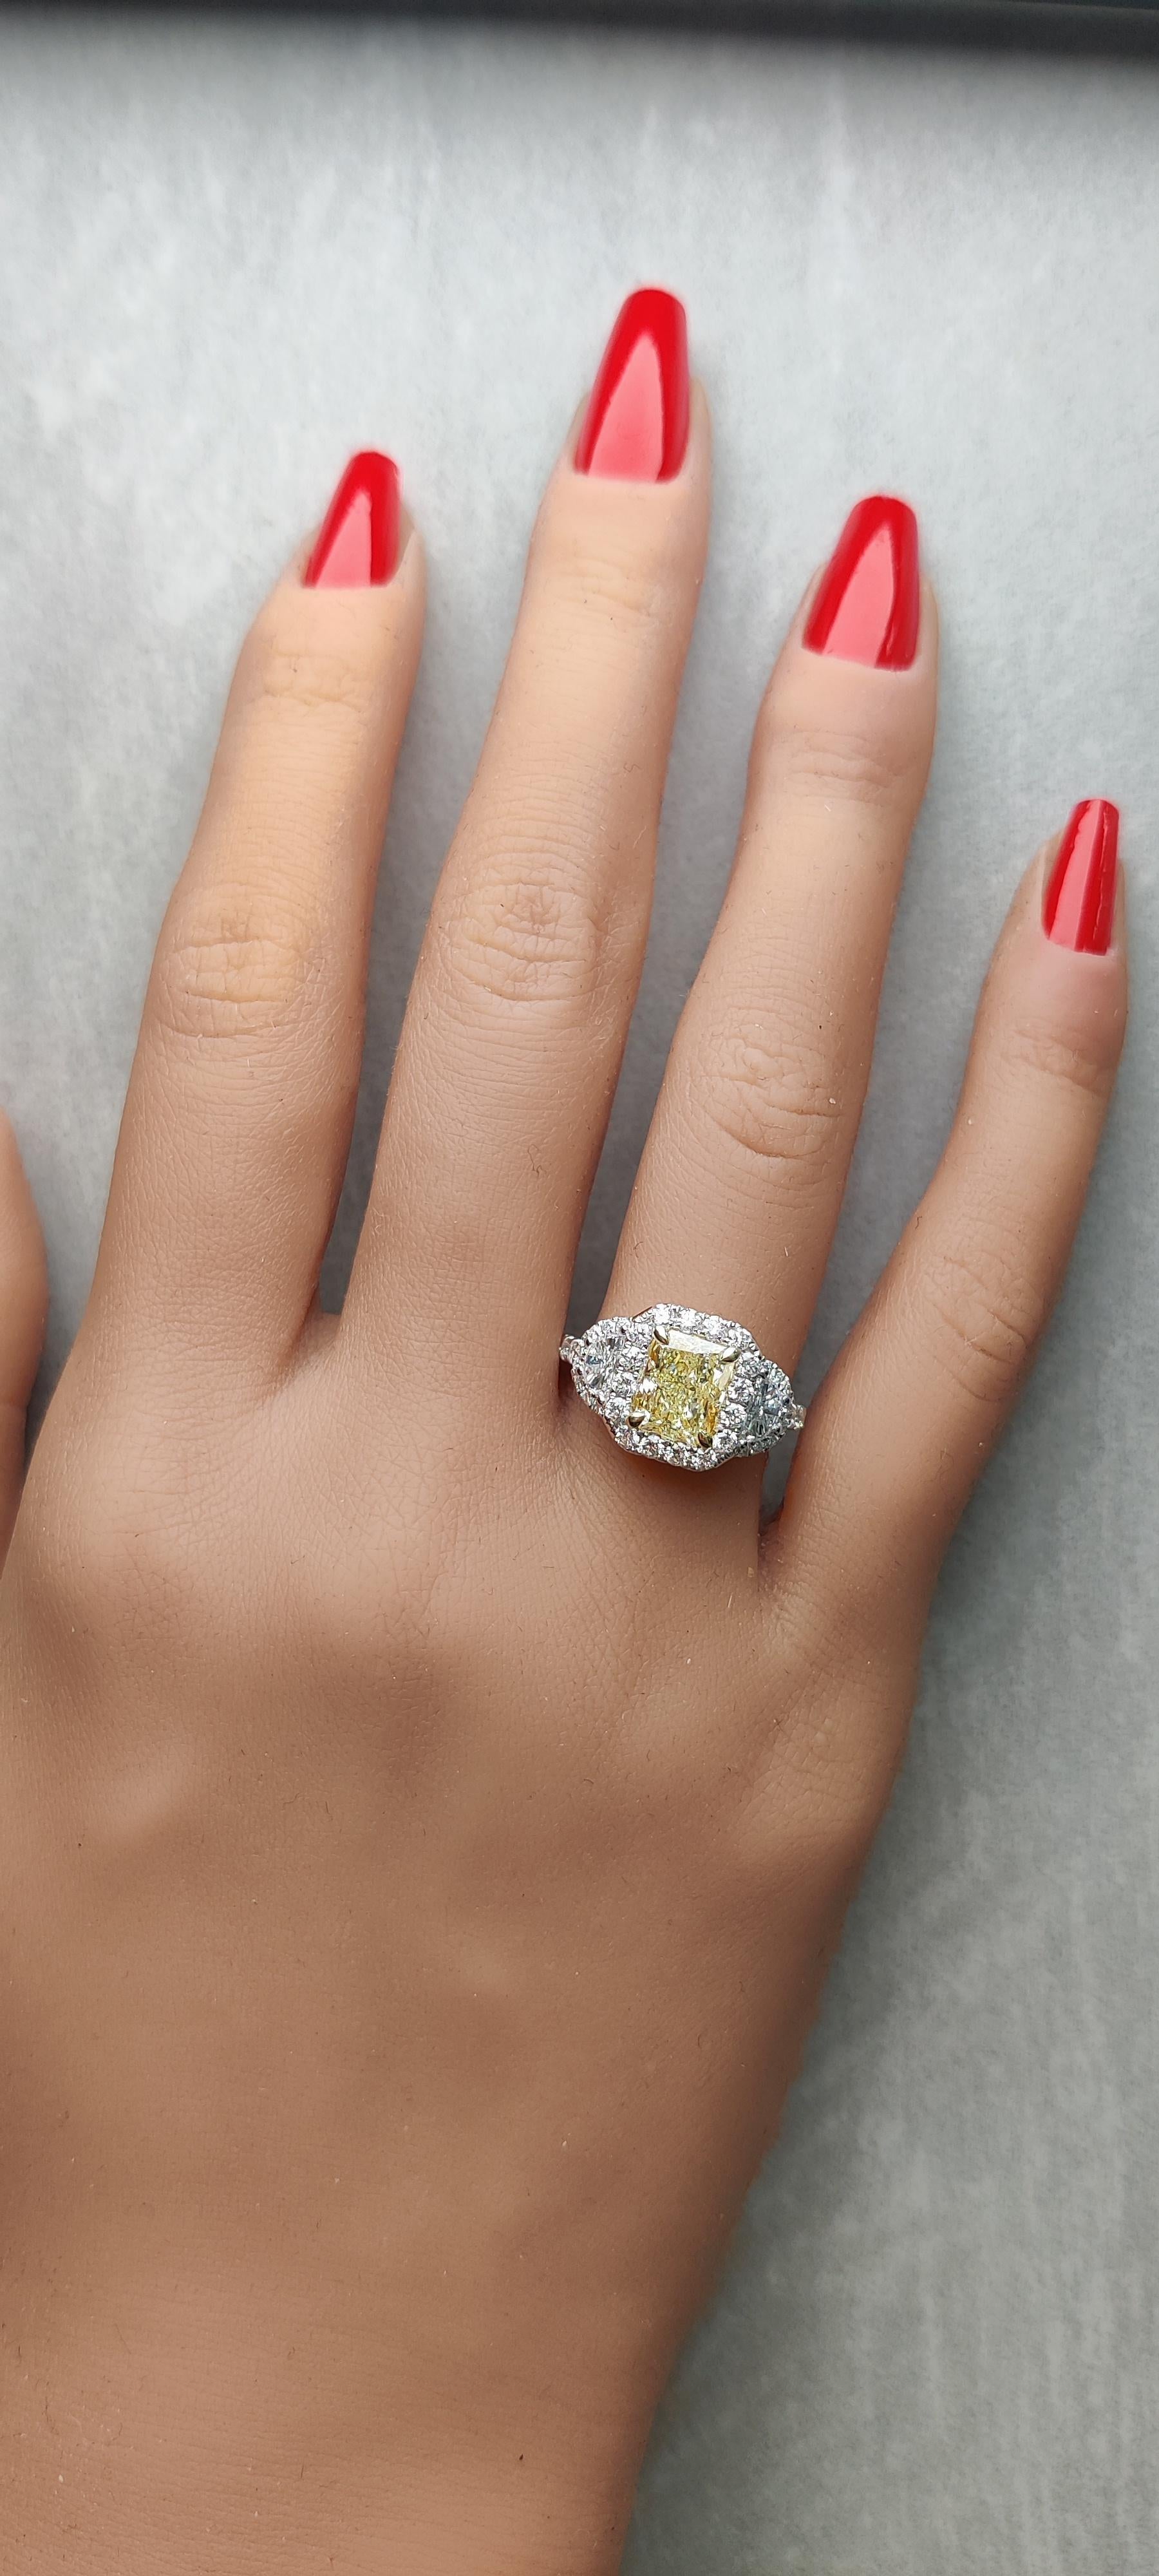 RareGemWorld's classic diamond ring. Mounted in a beautiful Platinum and 18K Gold setting with a natural radiant cut yellow diamond. The yellow diamond is surrounded by two GIA certified natural half moon cut white diamonds and round natural white